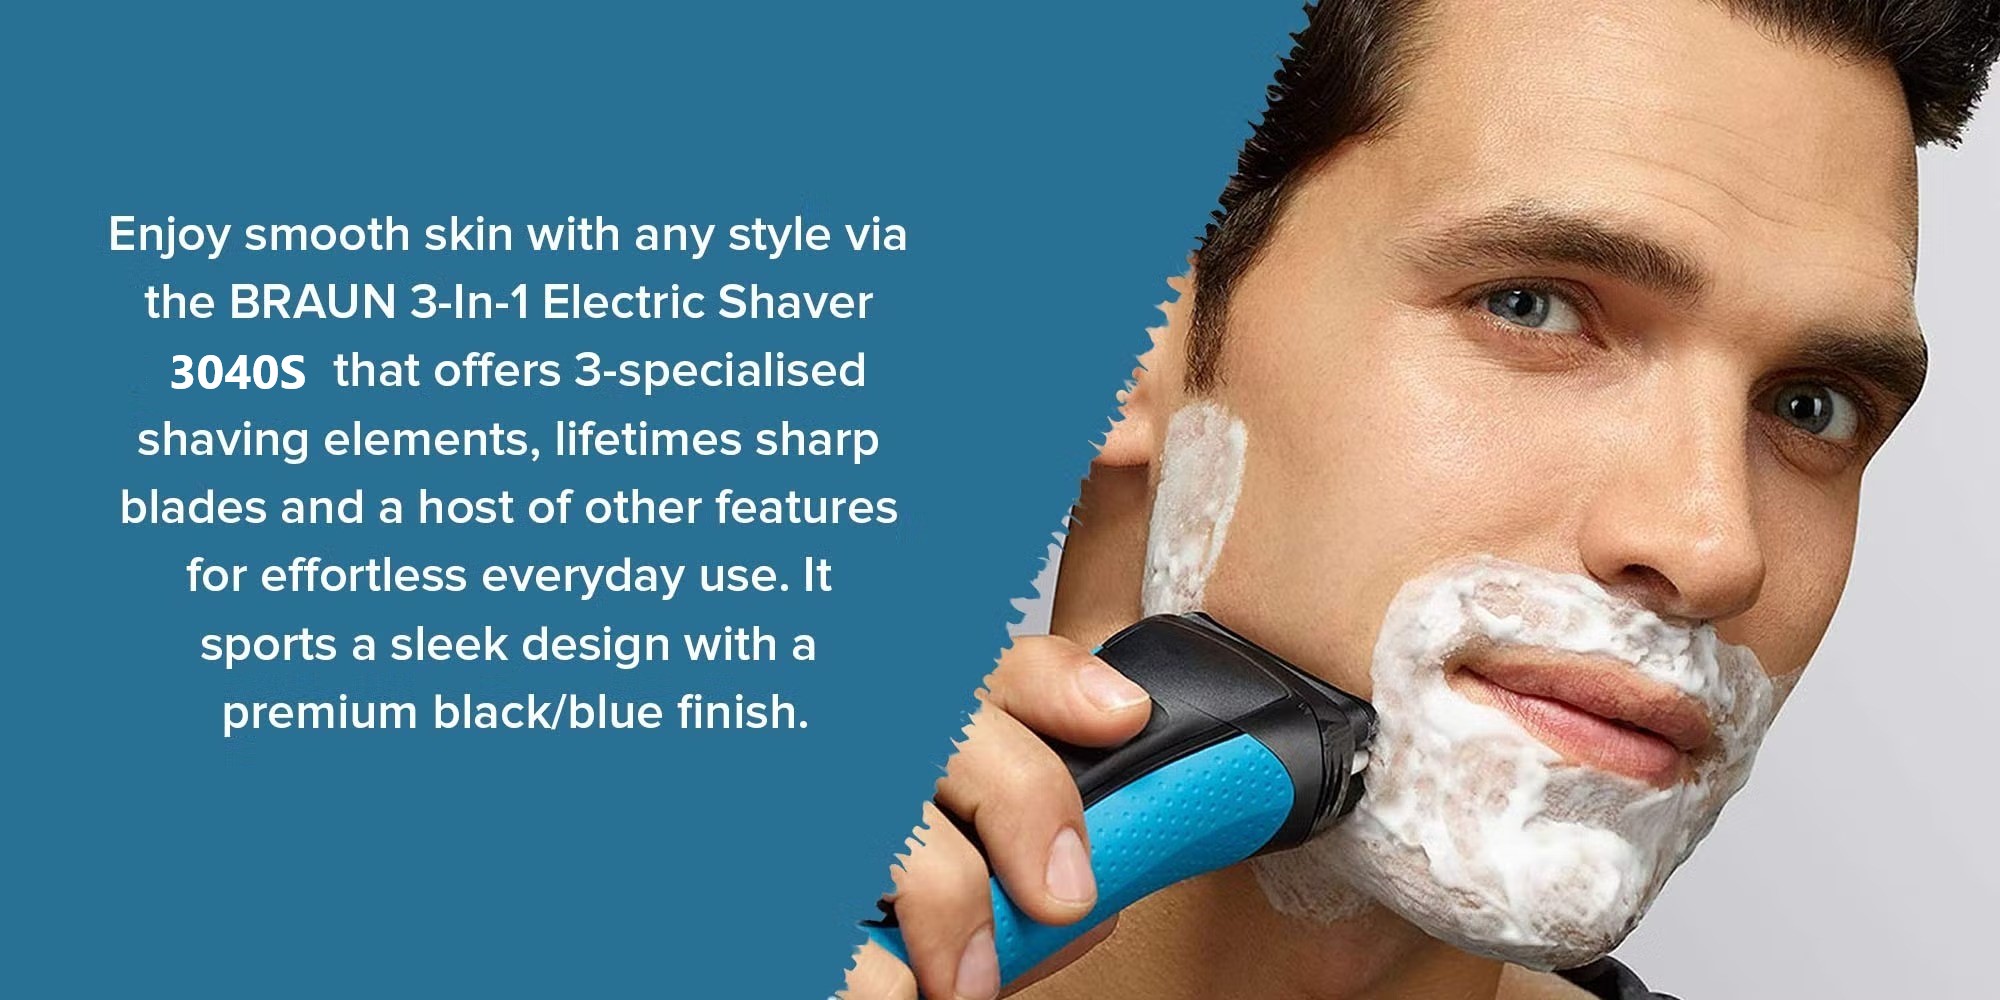 Braun Wet and Dry Shaver, Blue - 3040s